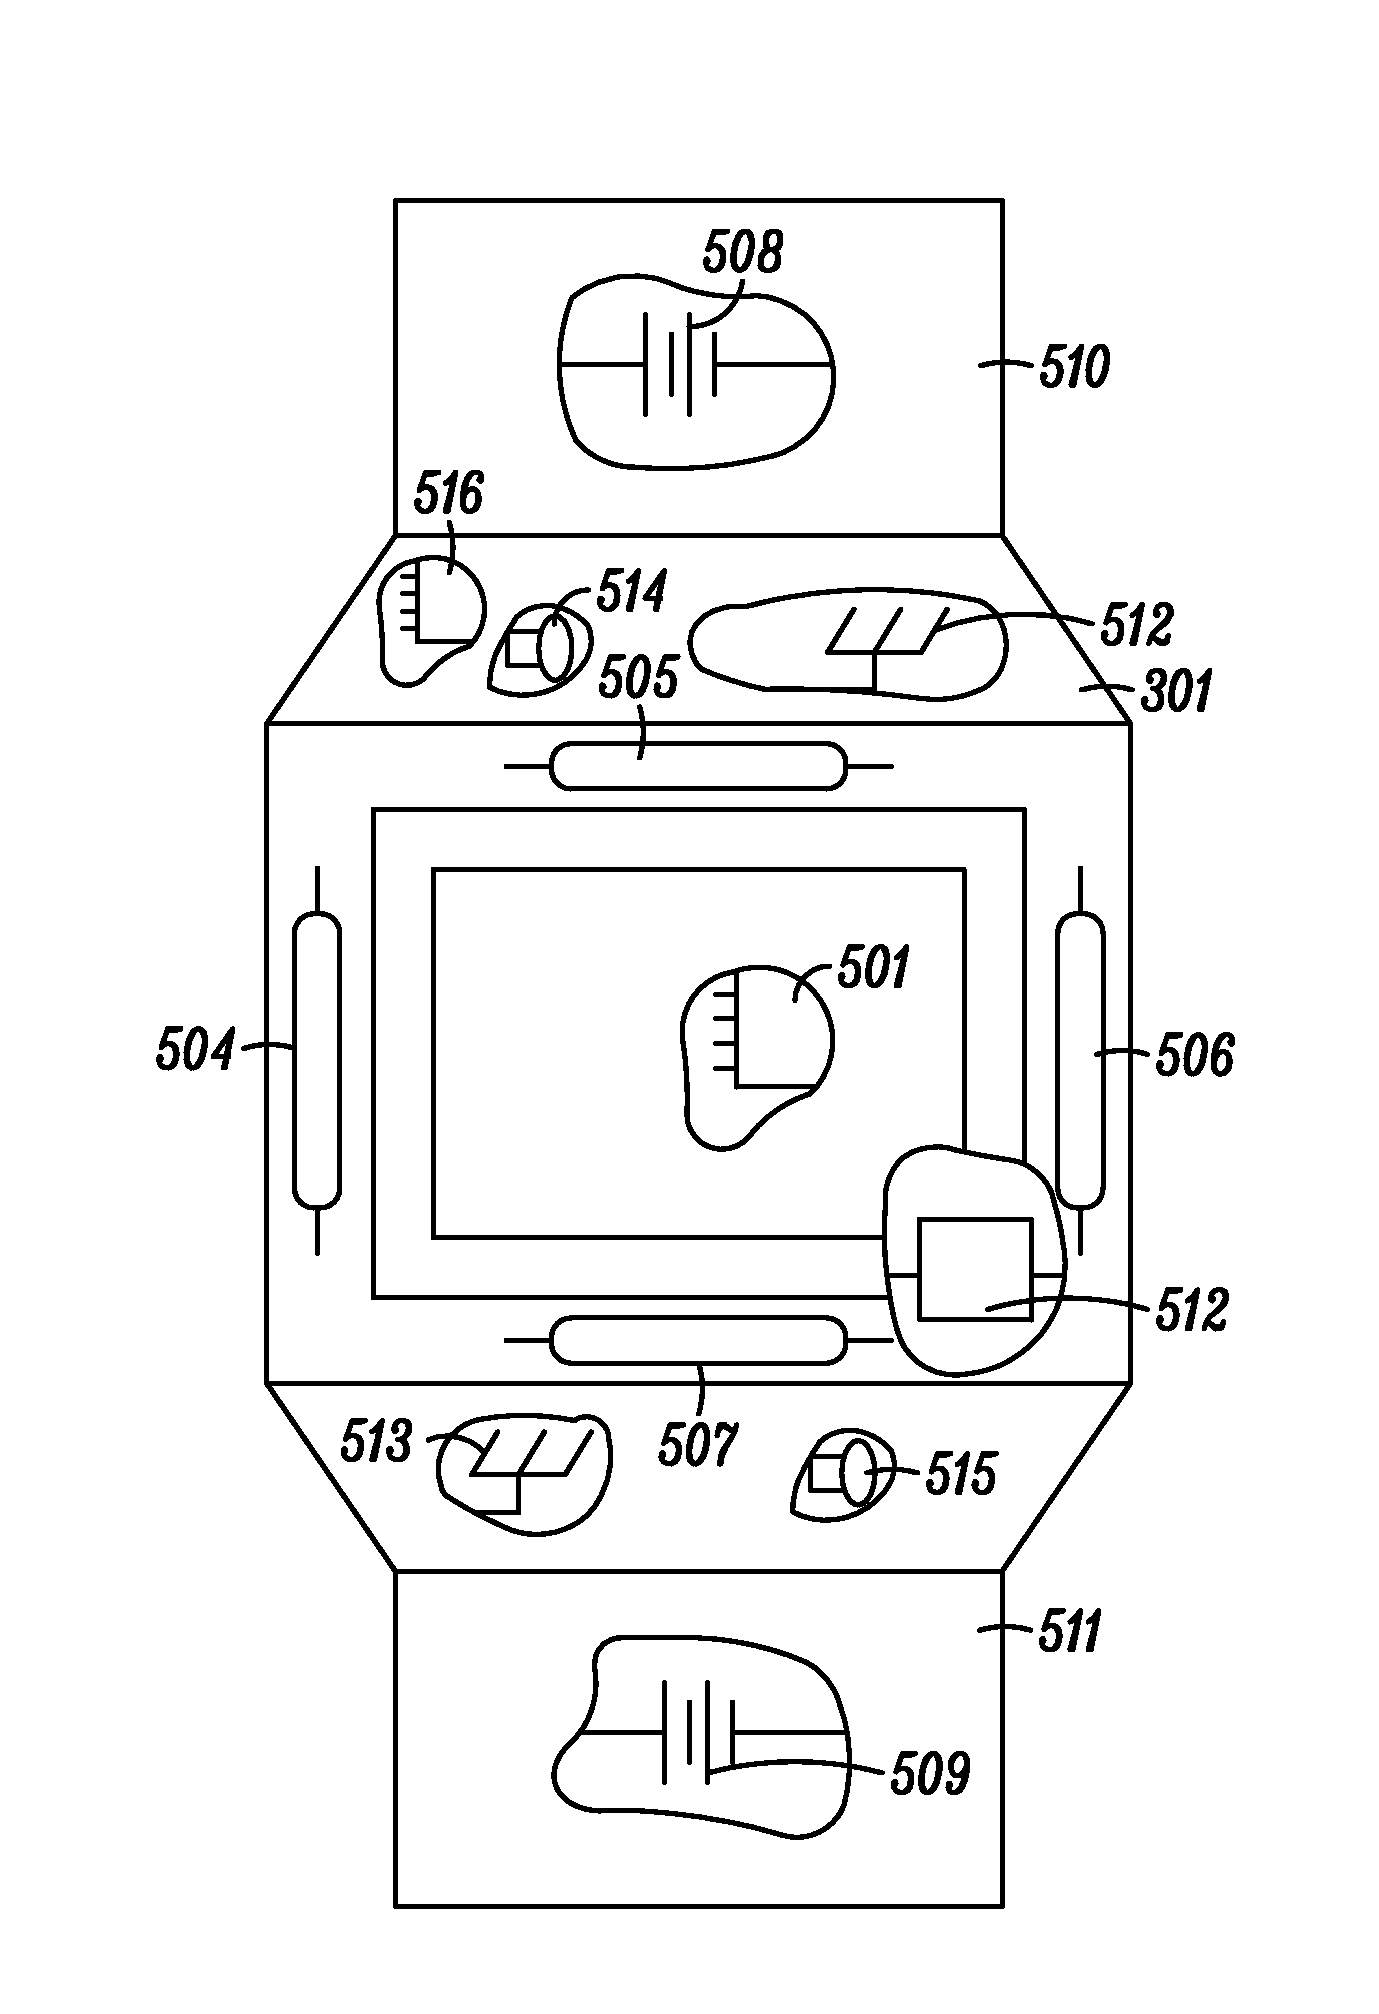 Methods and Apparatus for Providing Feedback from an Electronic Device